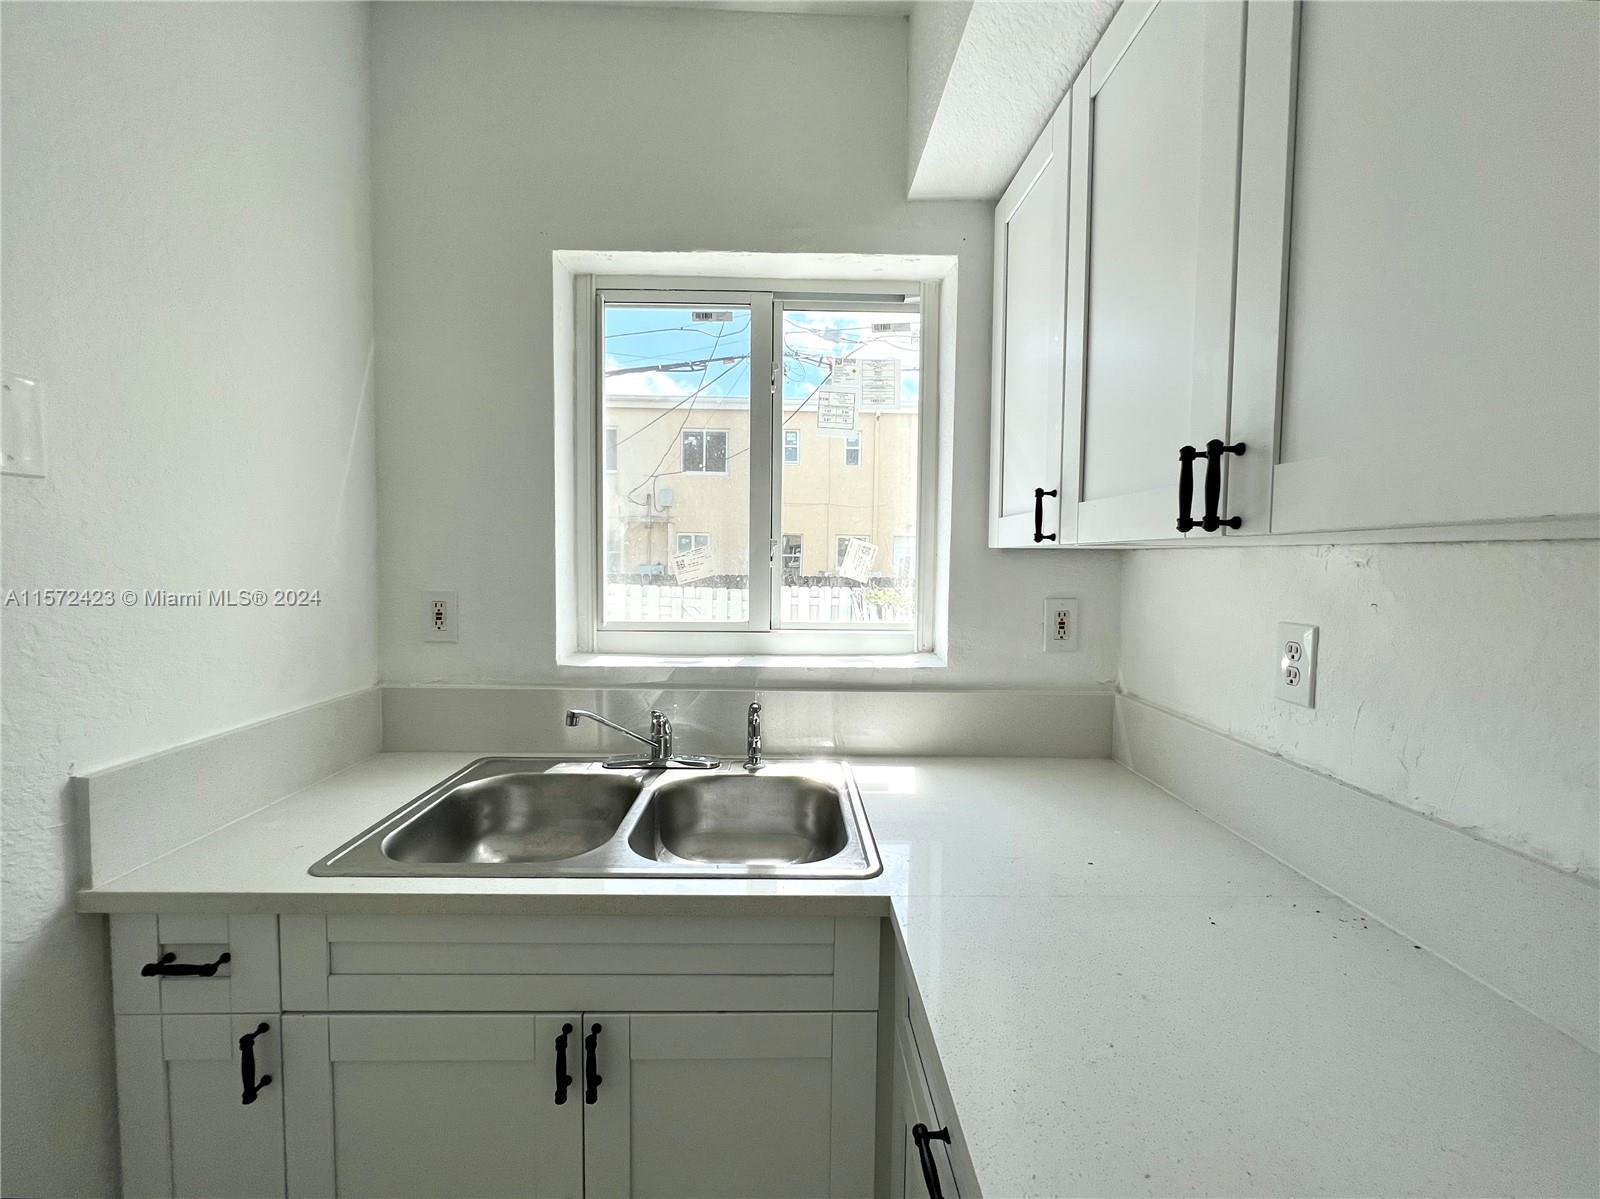 Photo of 444 NW 84th St #444 in Miami, FL